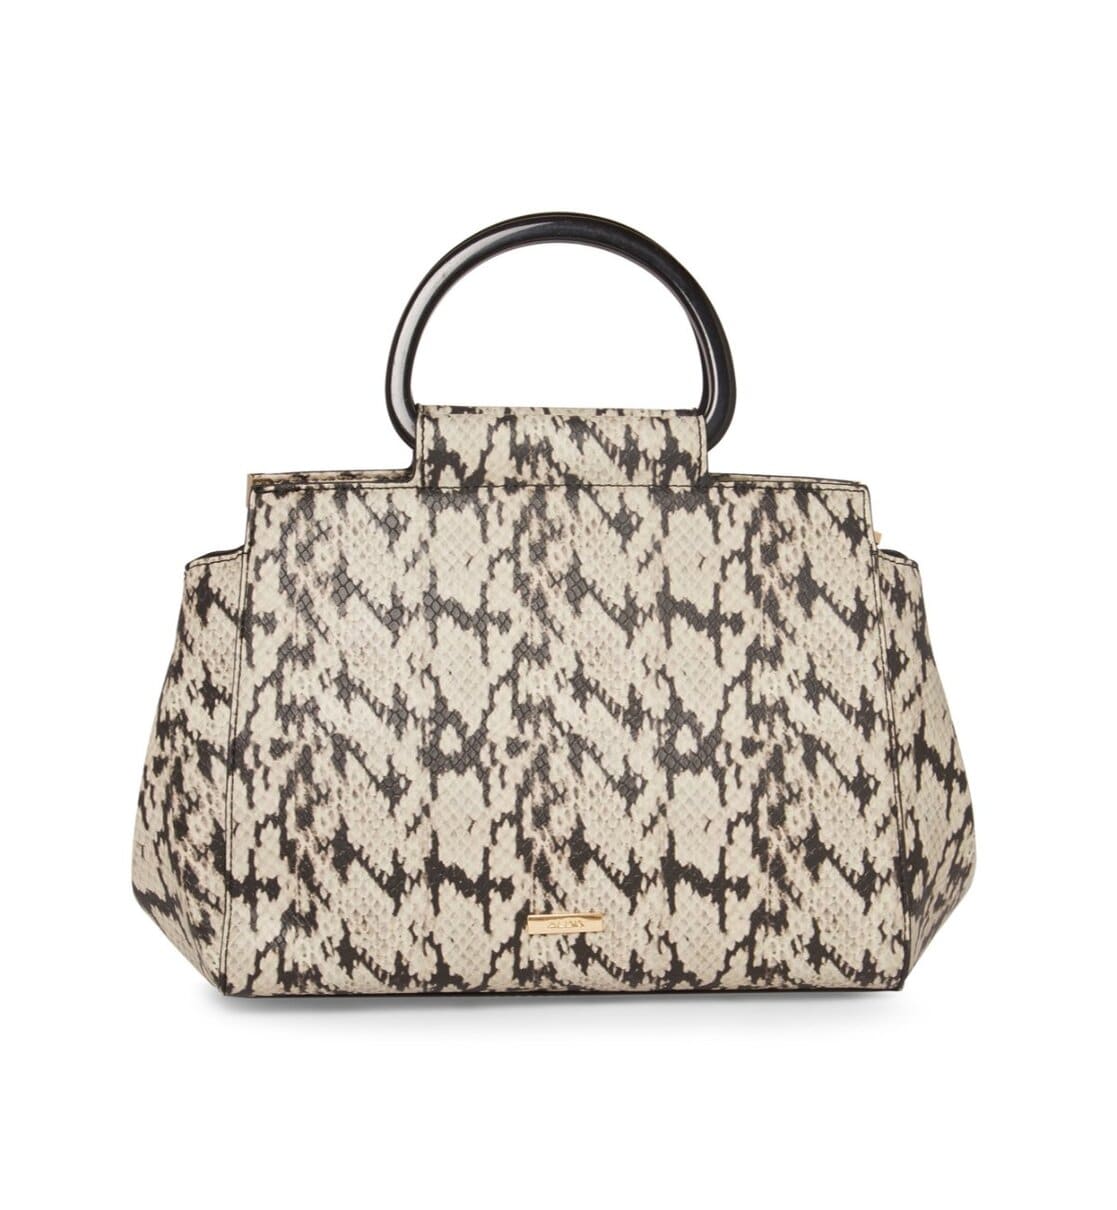 MARC JACOBS The Snakeskin Small Tote | Bloomingdale's